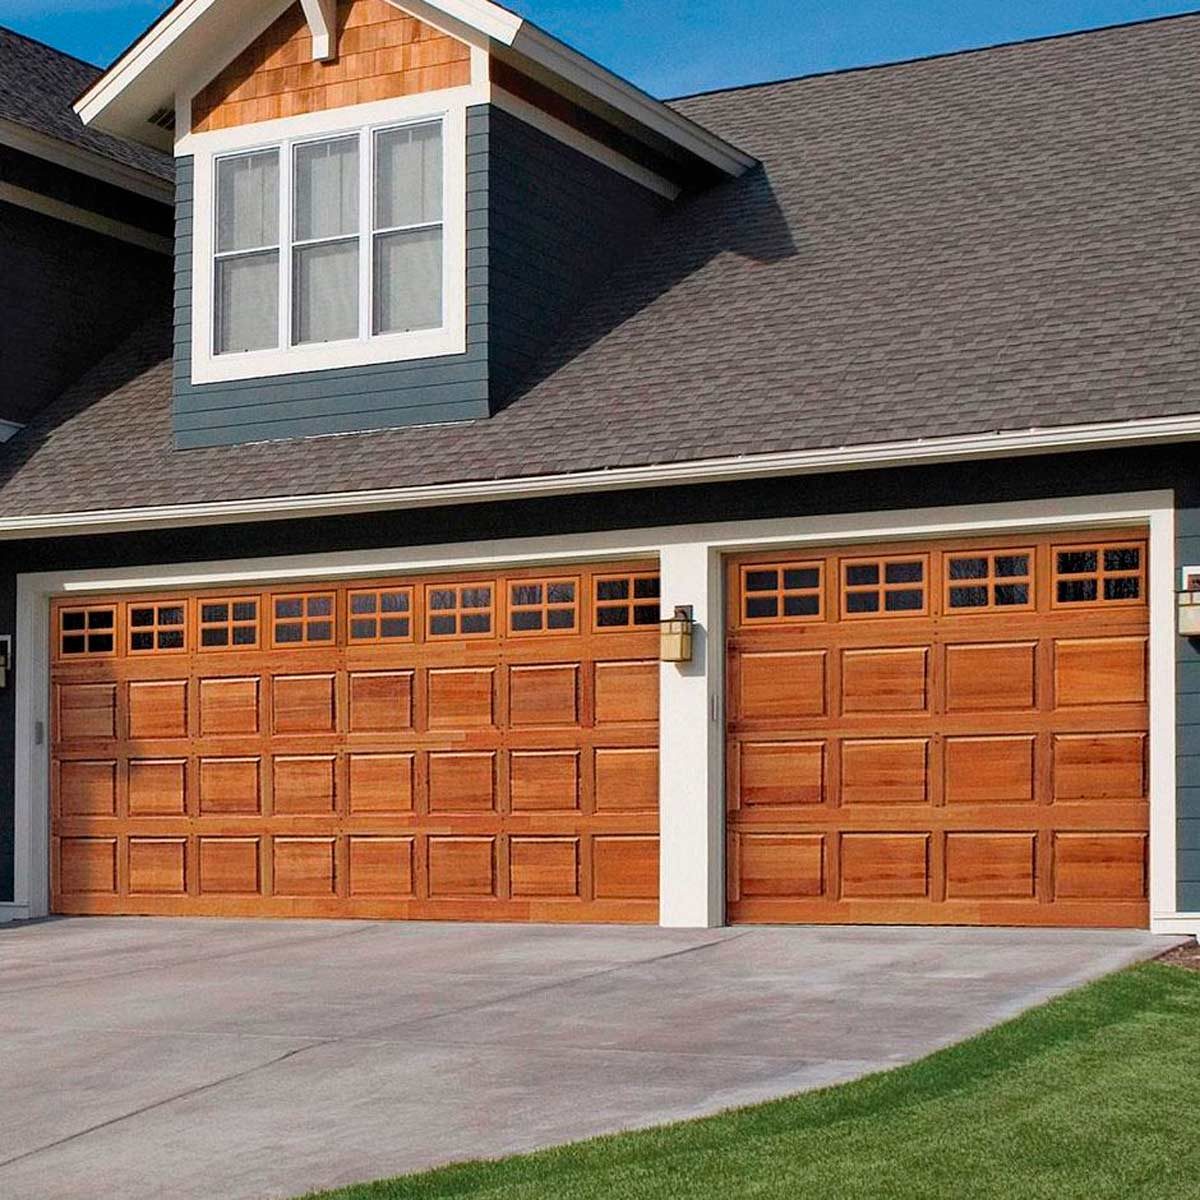 Should Your Garage Door Match Your House Color?